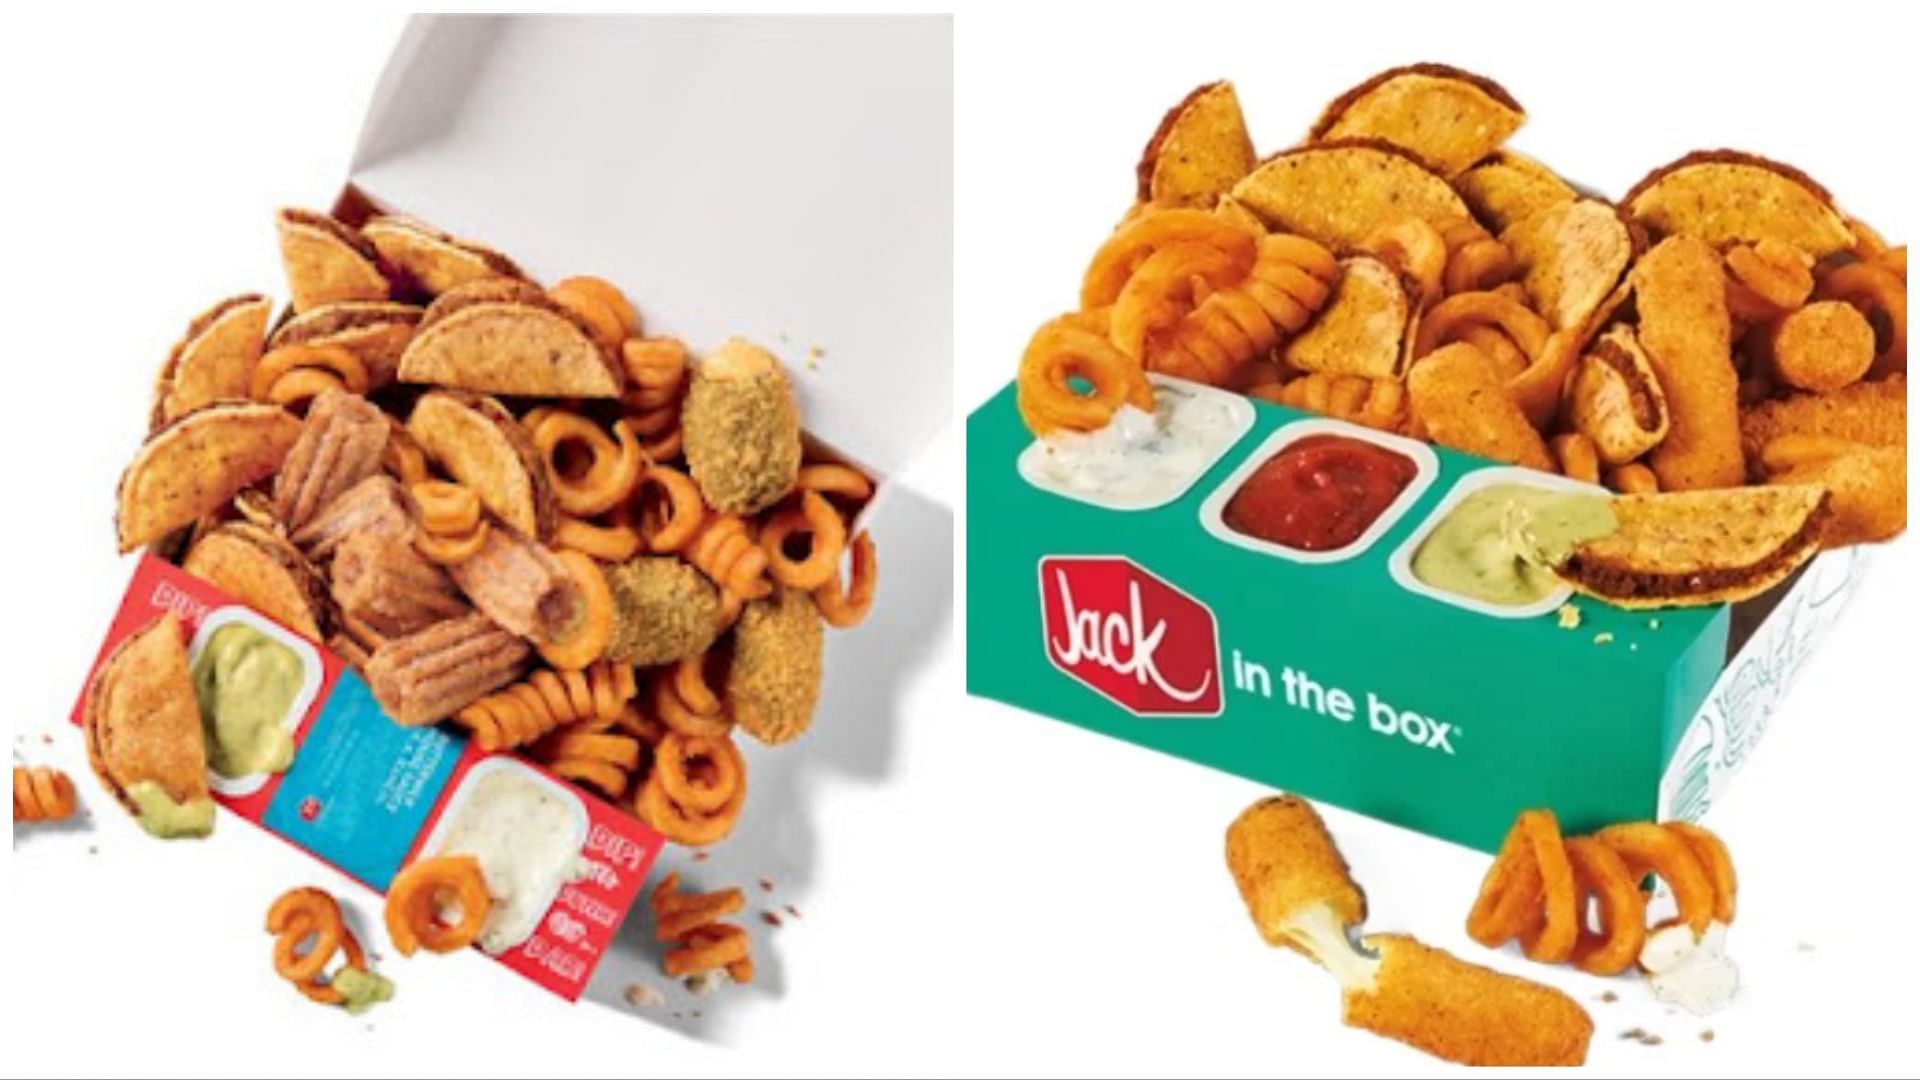 The brand is back with another new offer (Image via Jack in the Box)